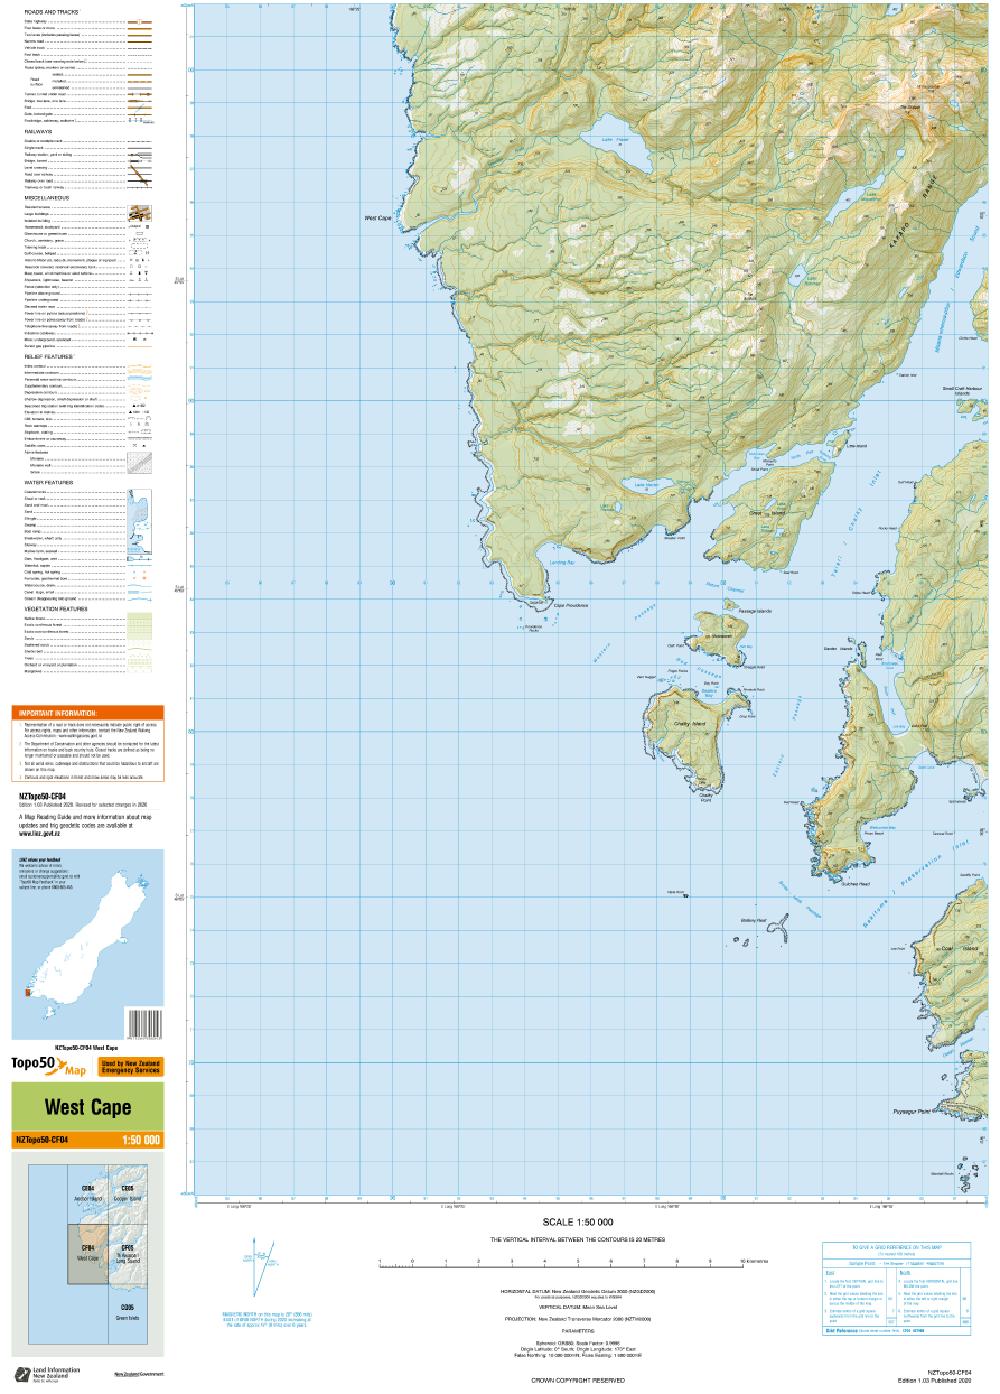 Topo map of West Cape